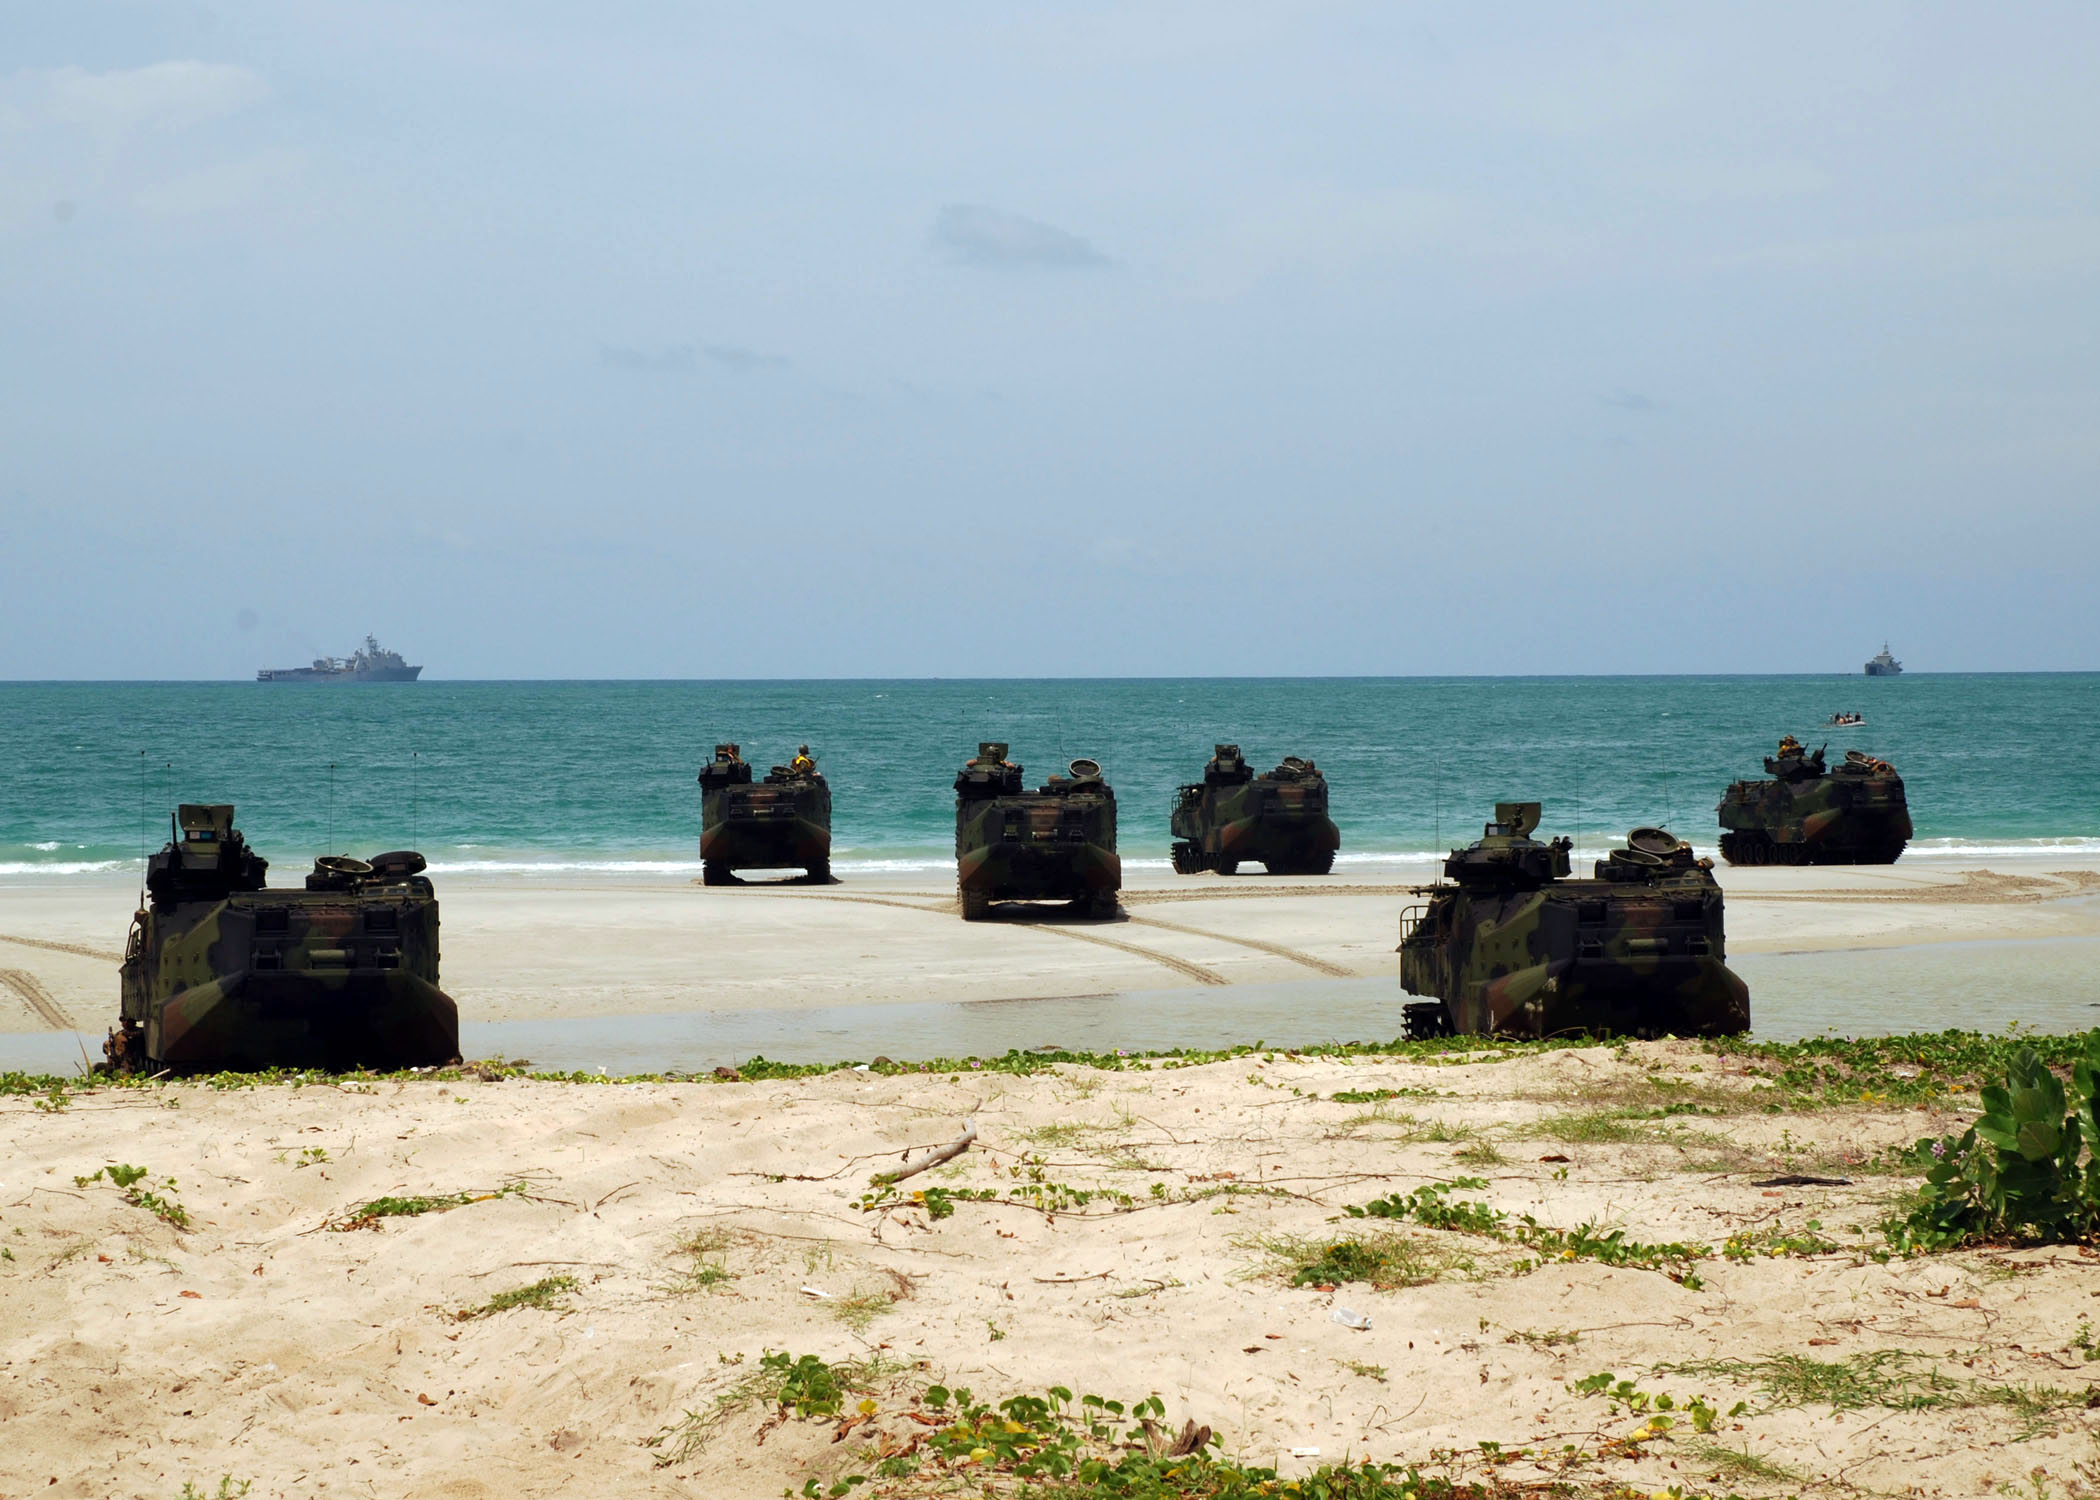 Royal Thai and U.S. Marine amphibious assault vehicles land on the beach during a simulated amphibious assault for Cooperation Afloat Readiness and Training Thailand 2012.